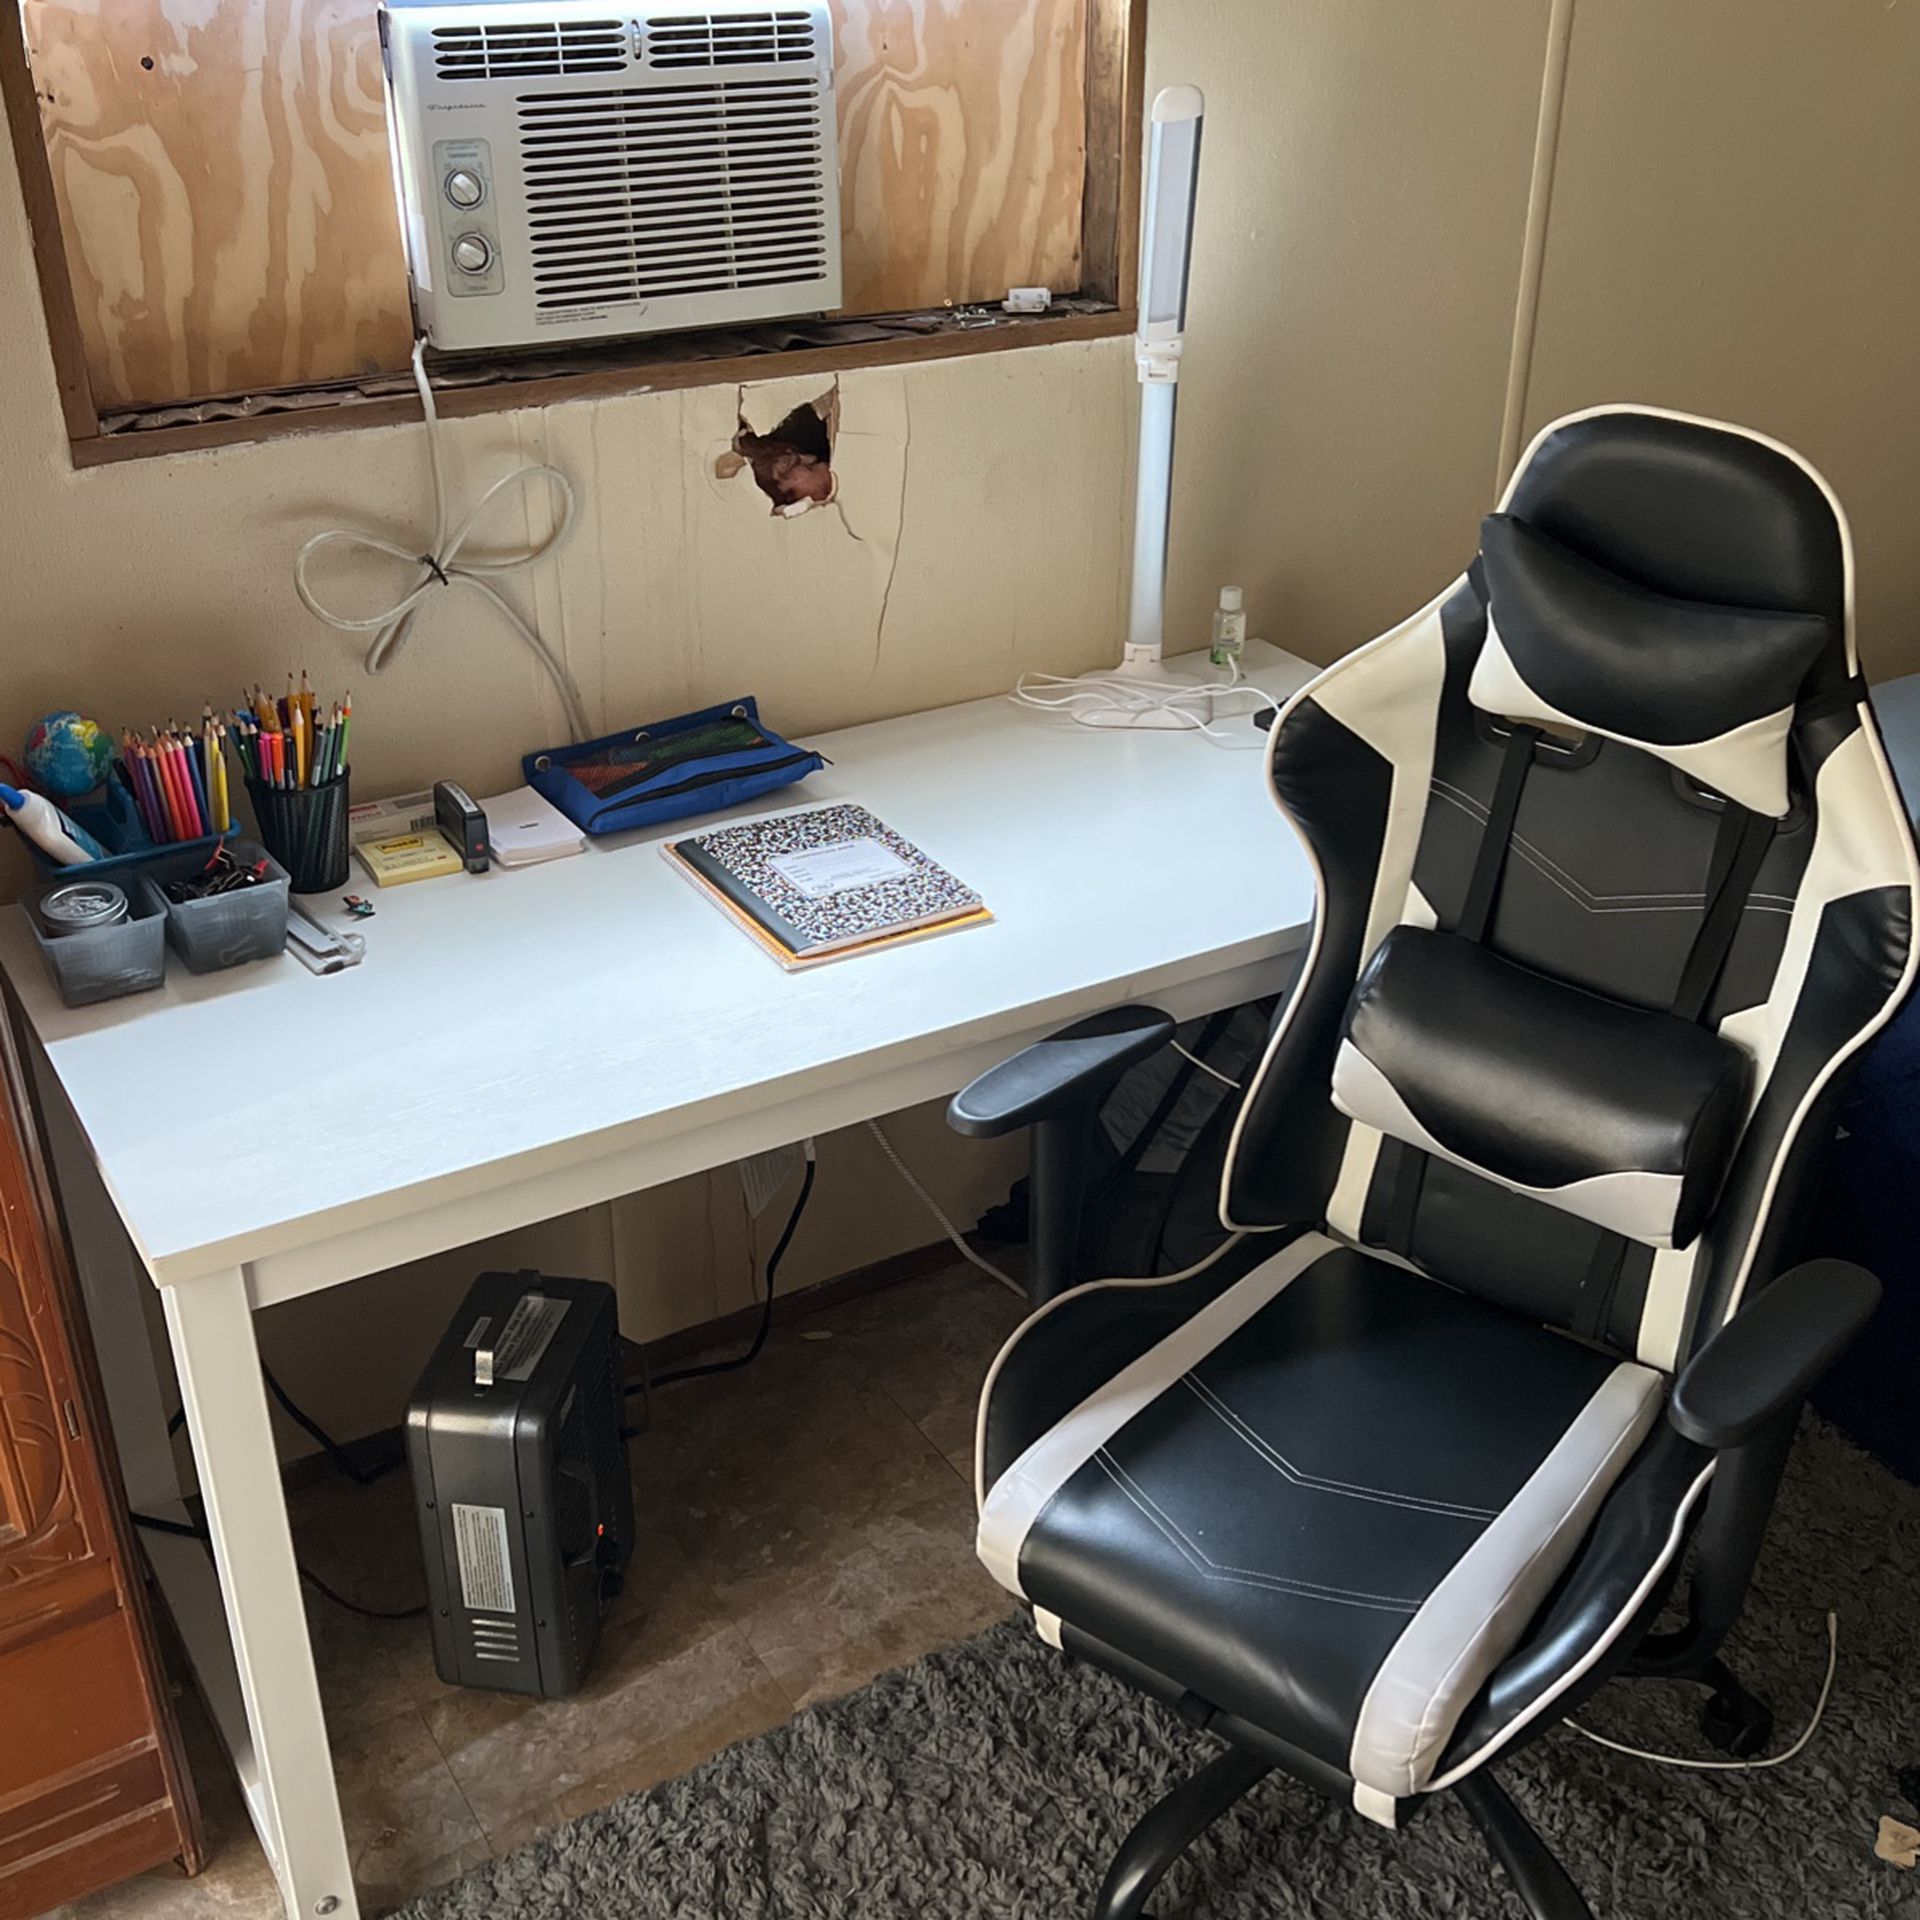 Large Desk and Adjustable Lamp.  (The chair is the photo was sold. )